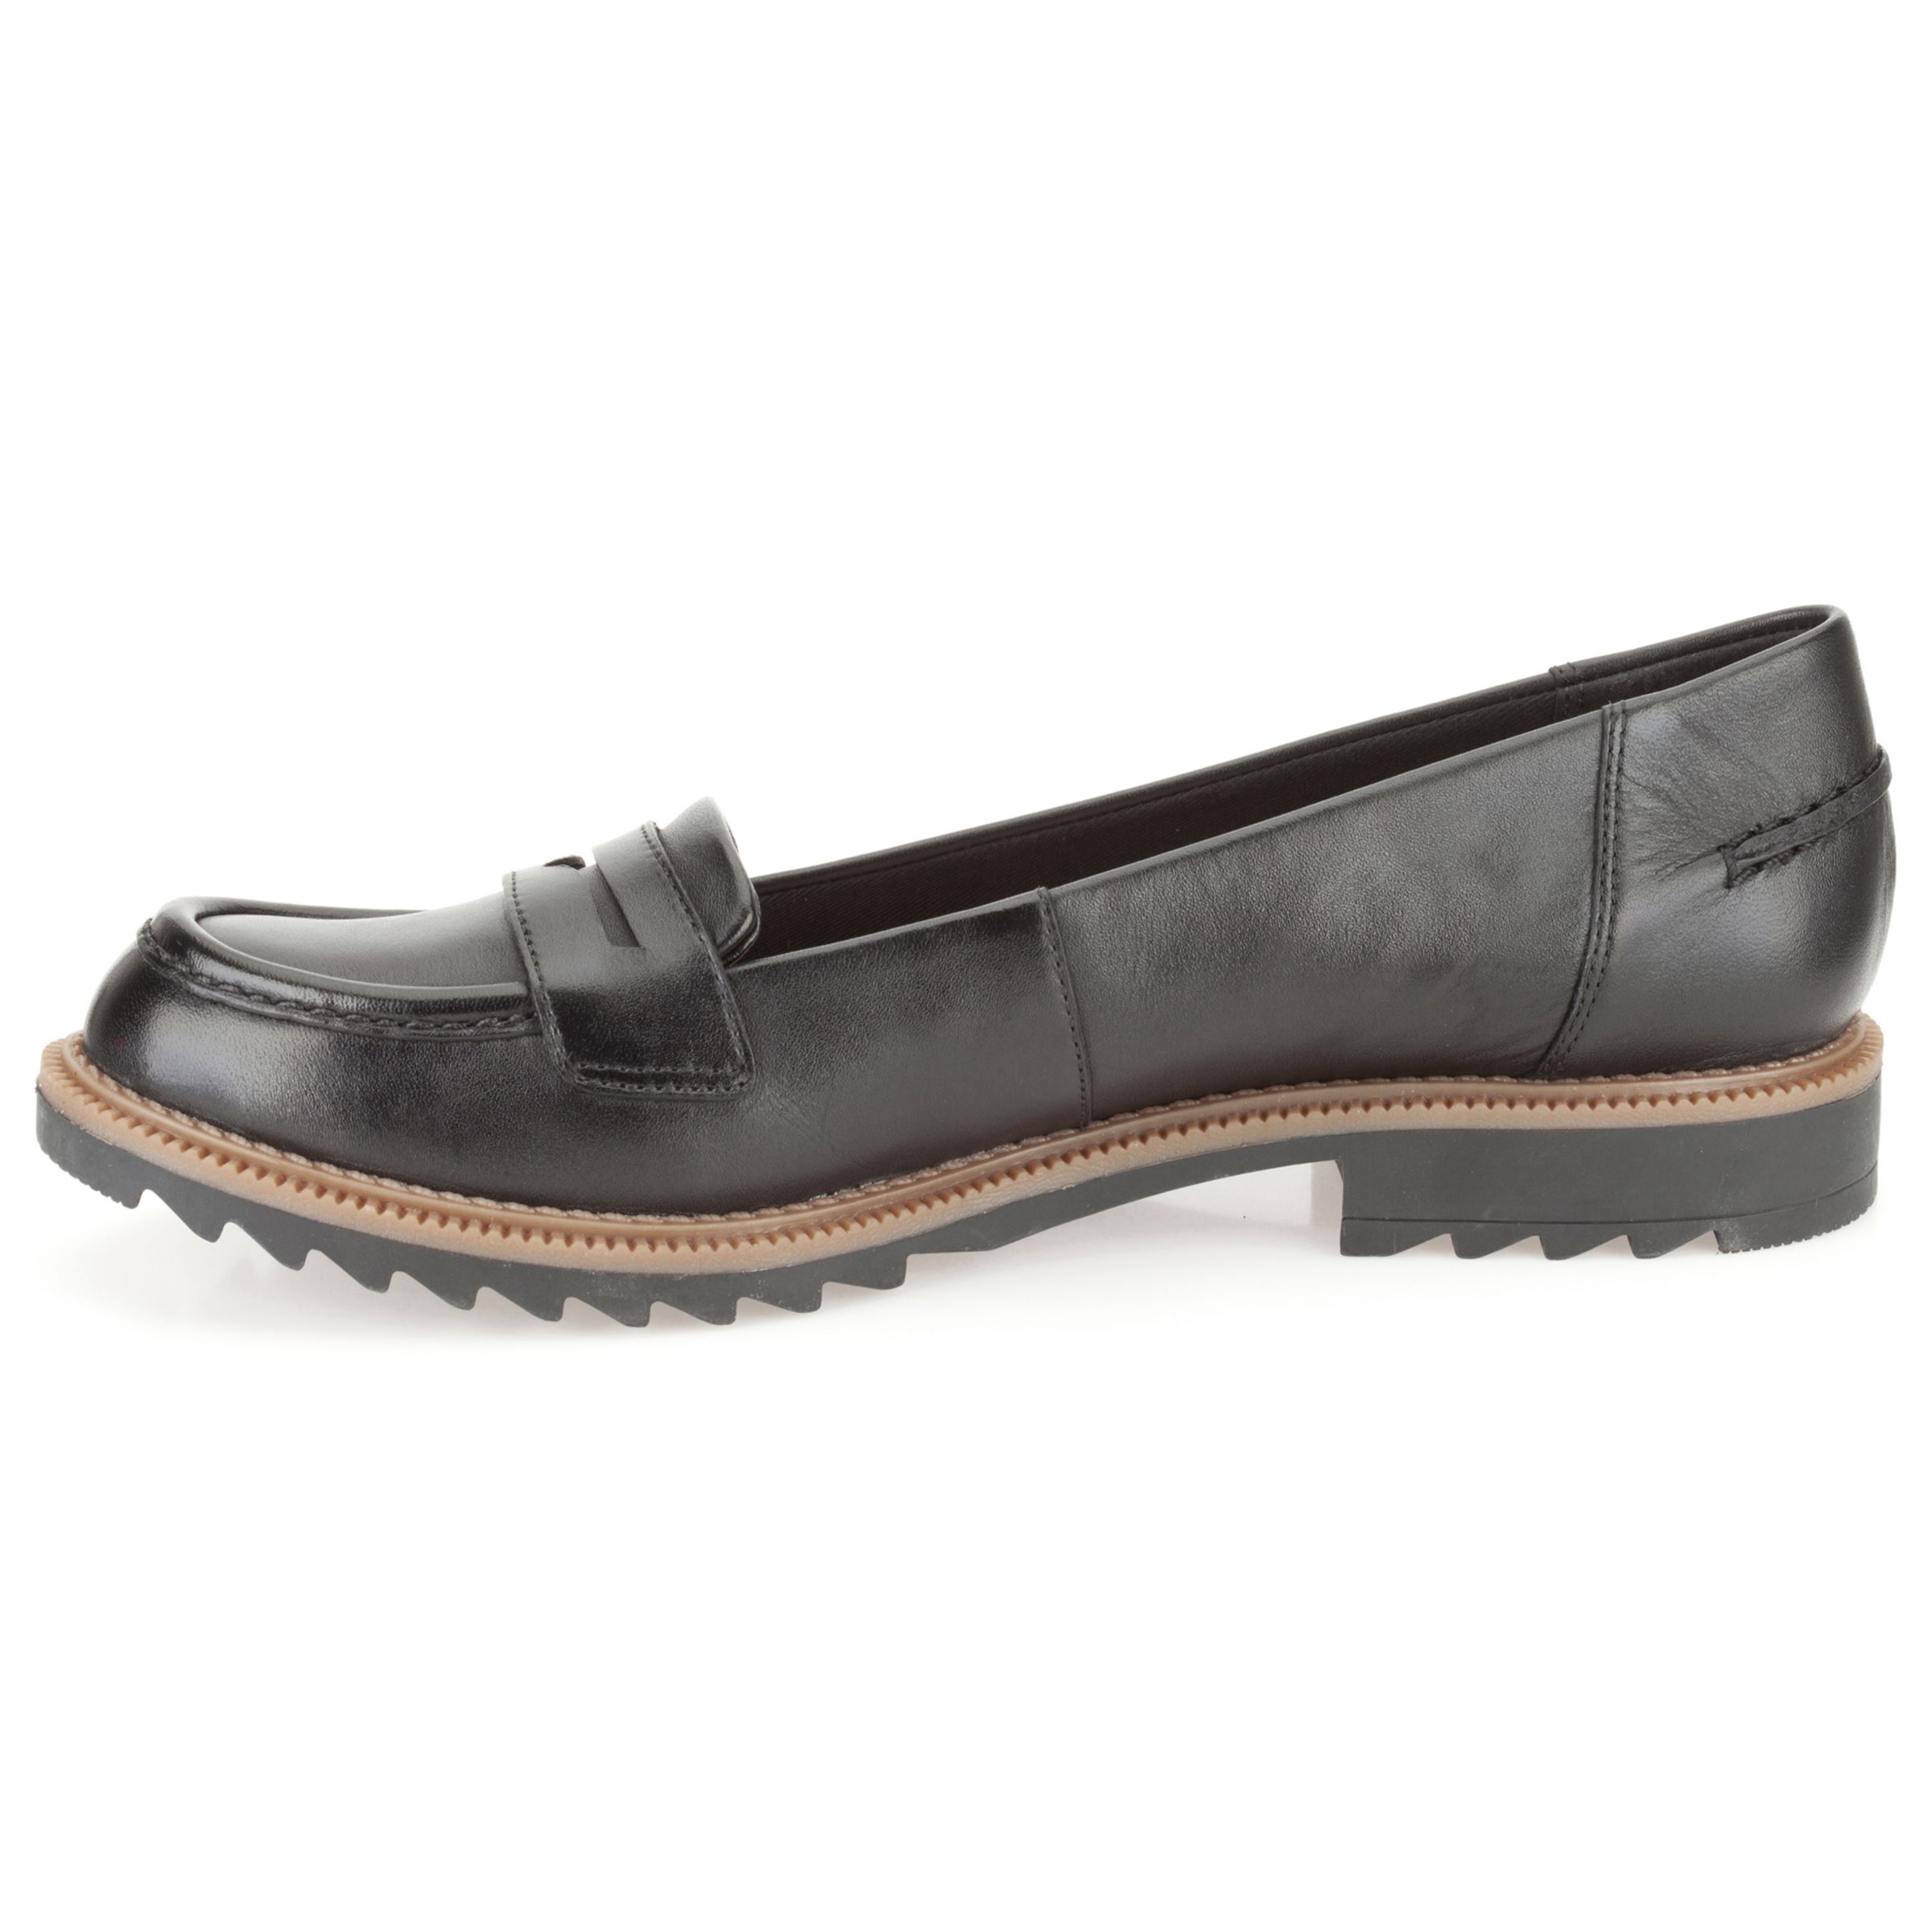 Clarks Griffin Milly Loafers, Black Leather